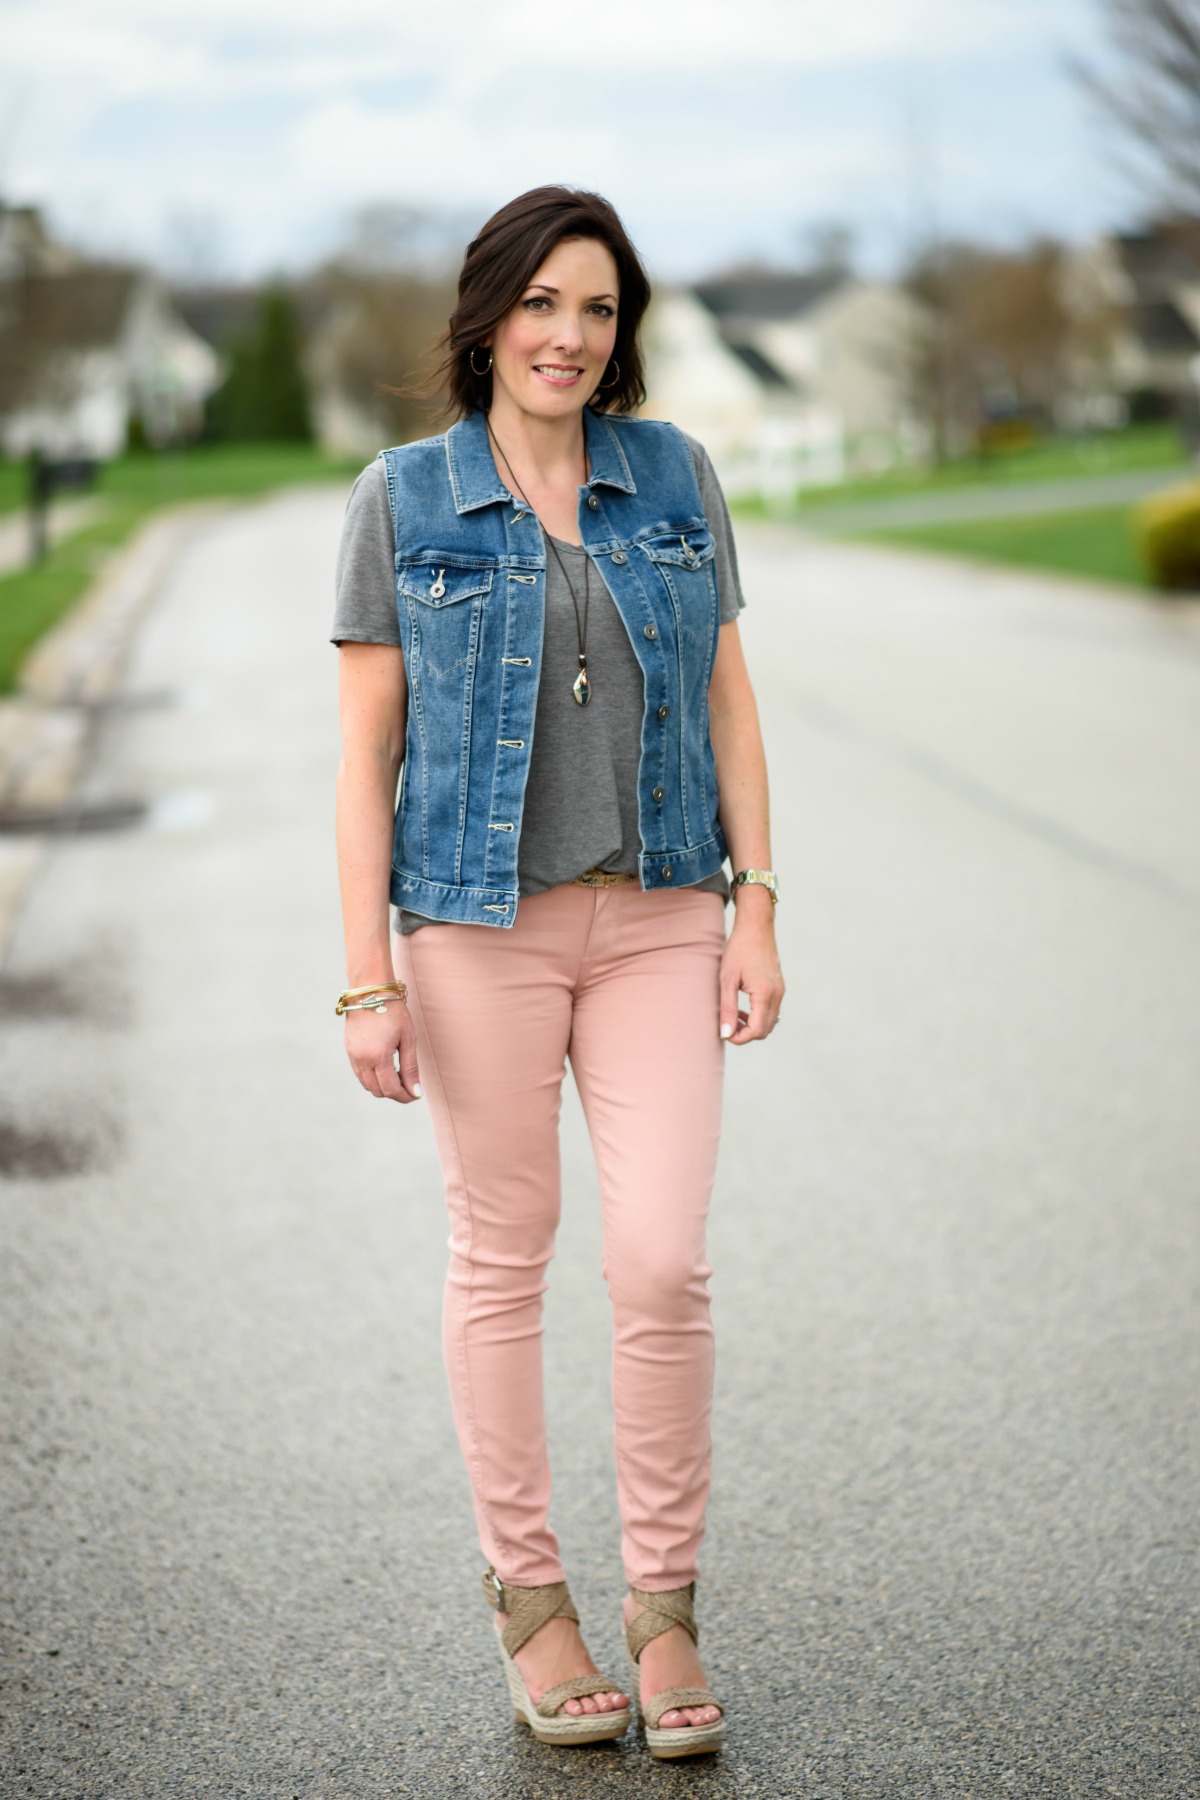 How To Style Pink Jeans: pink jeans, grey tee, denim vest, and wedge sandals